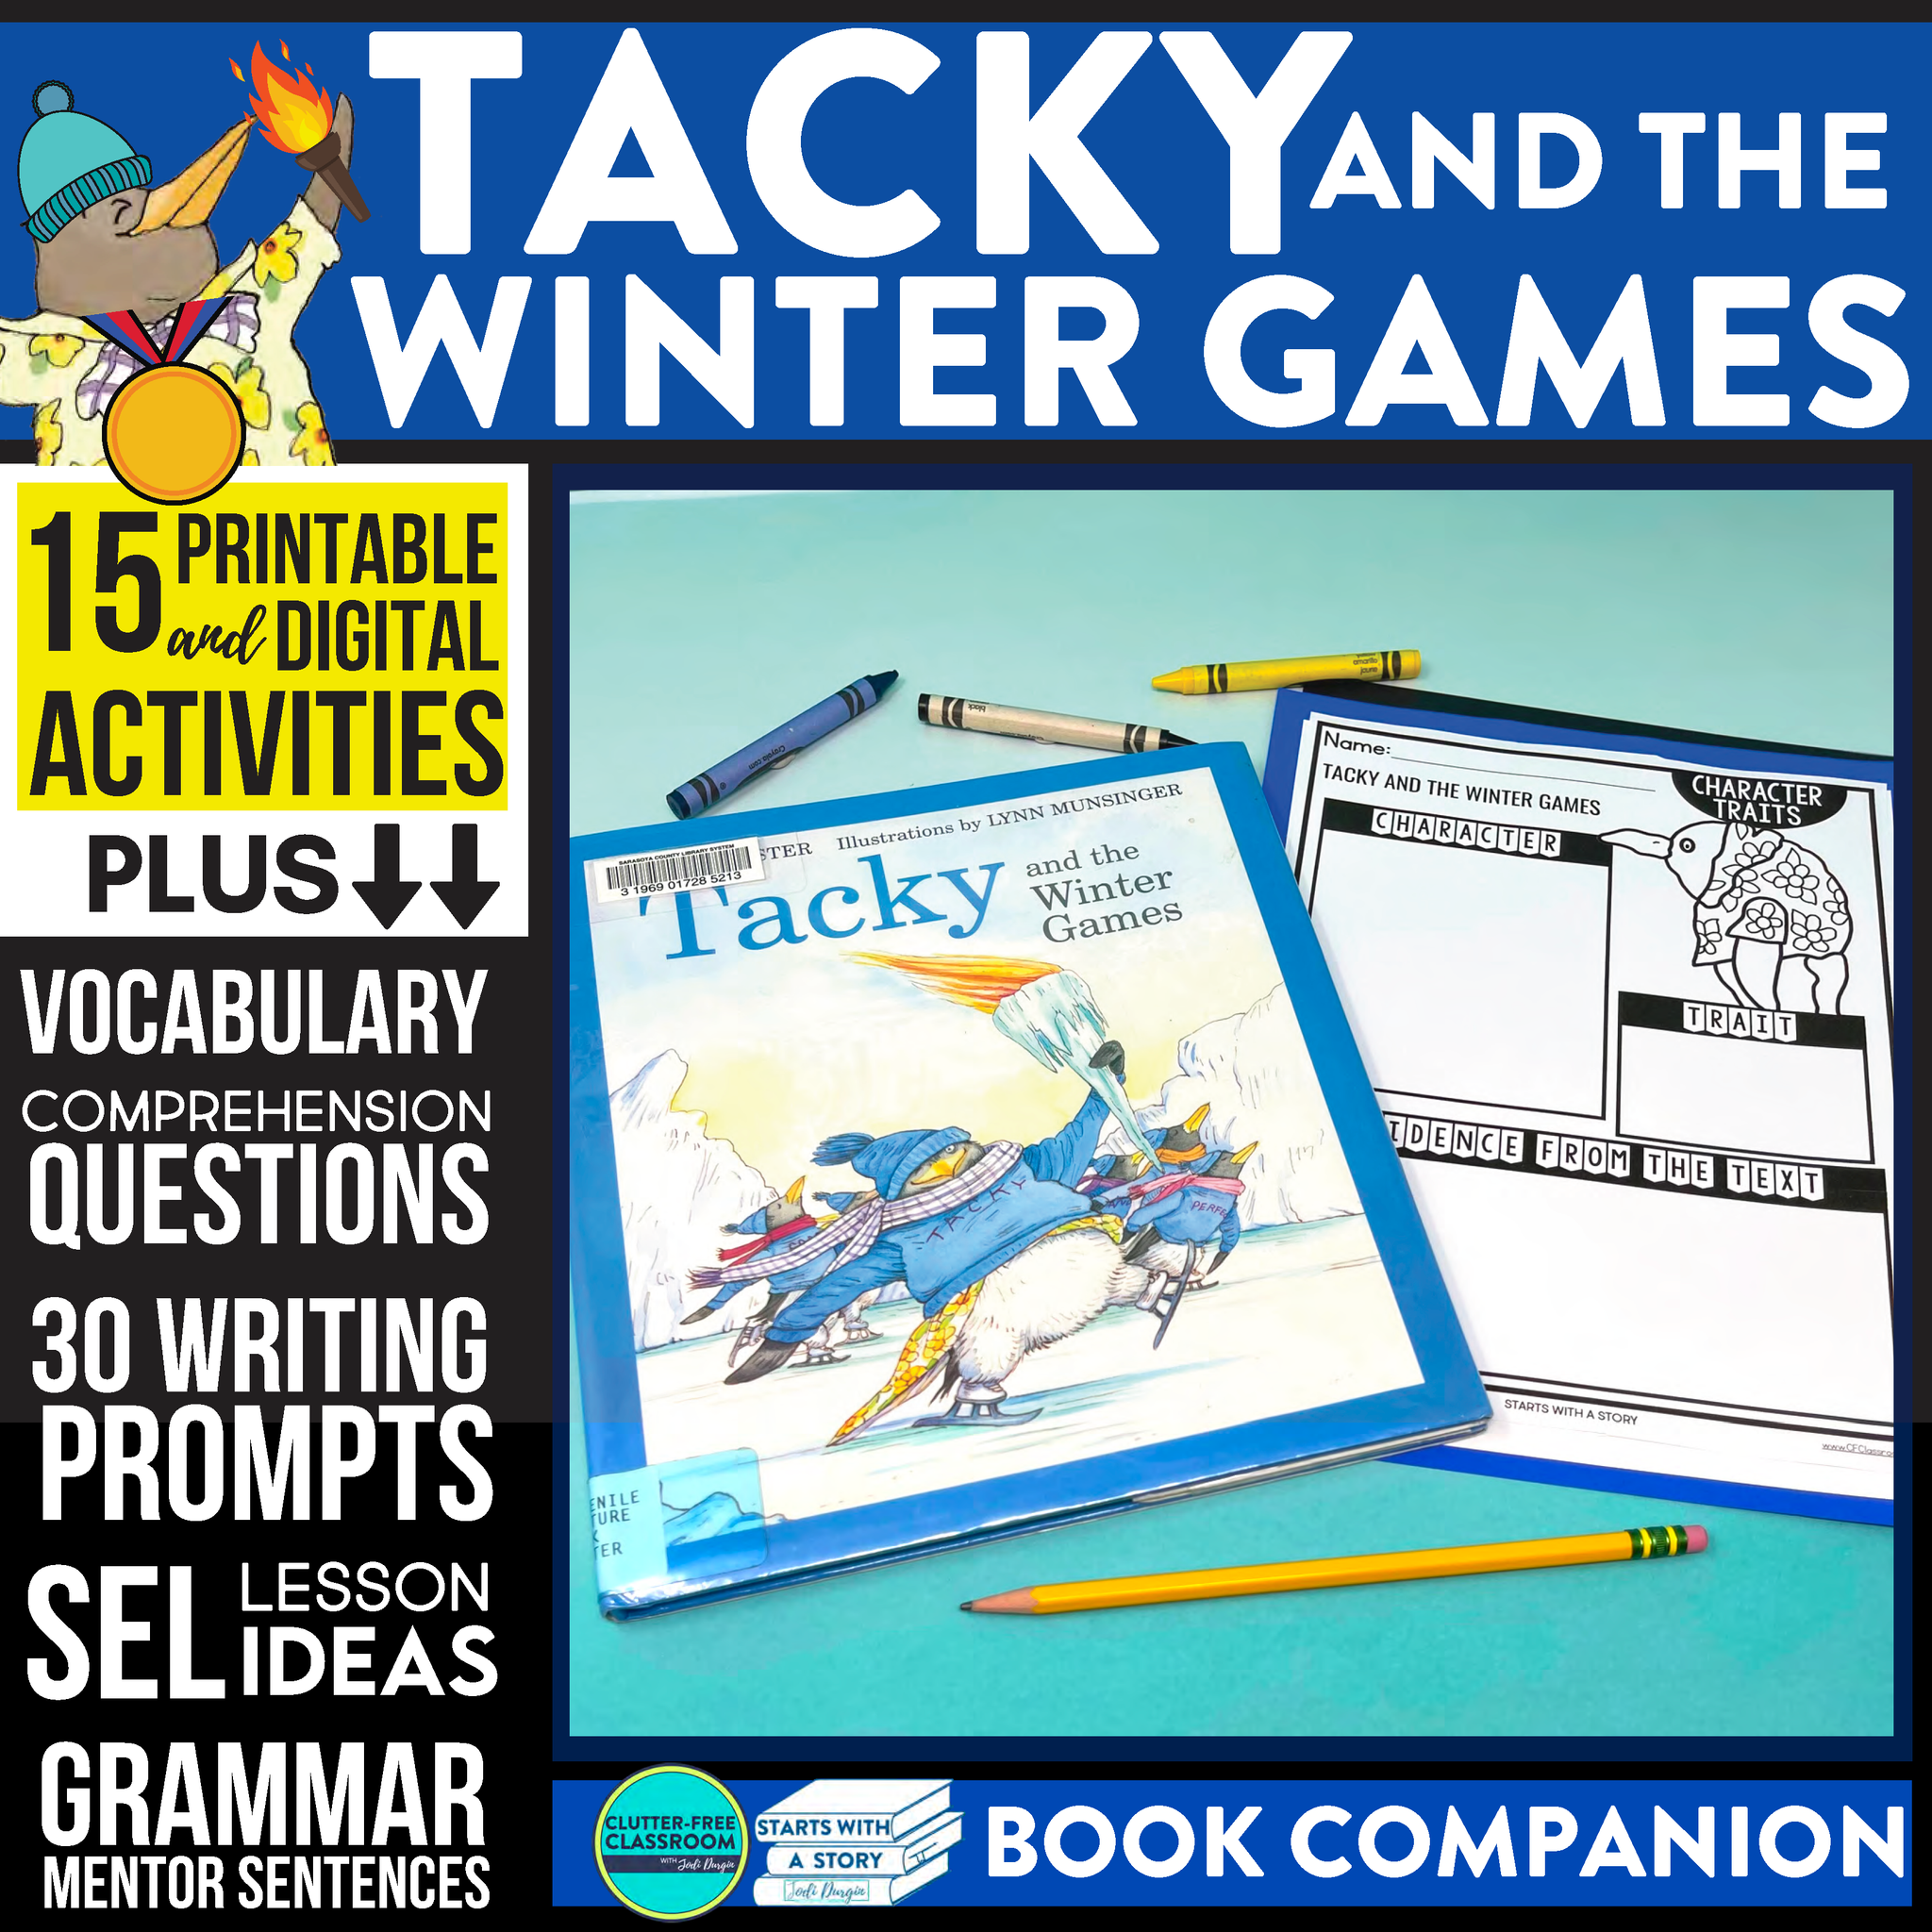 TACKY AND THE WINTER GAMES activities and lesson plan ideas